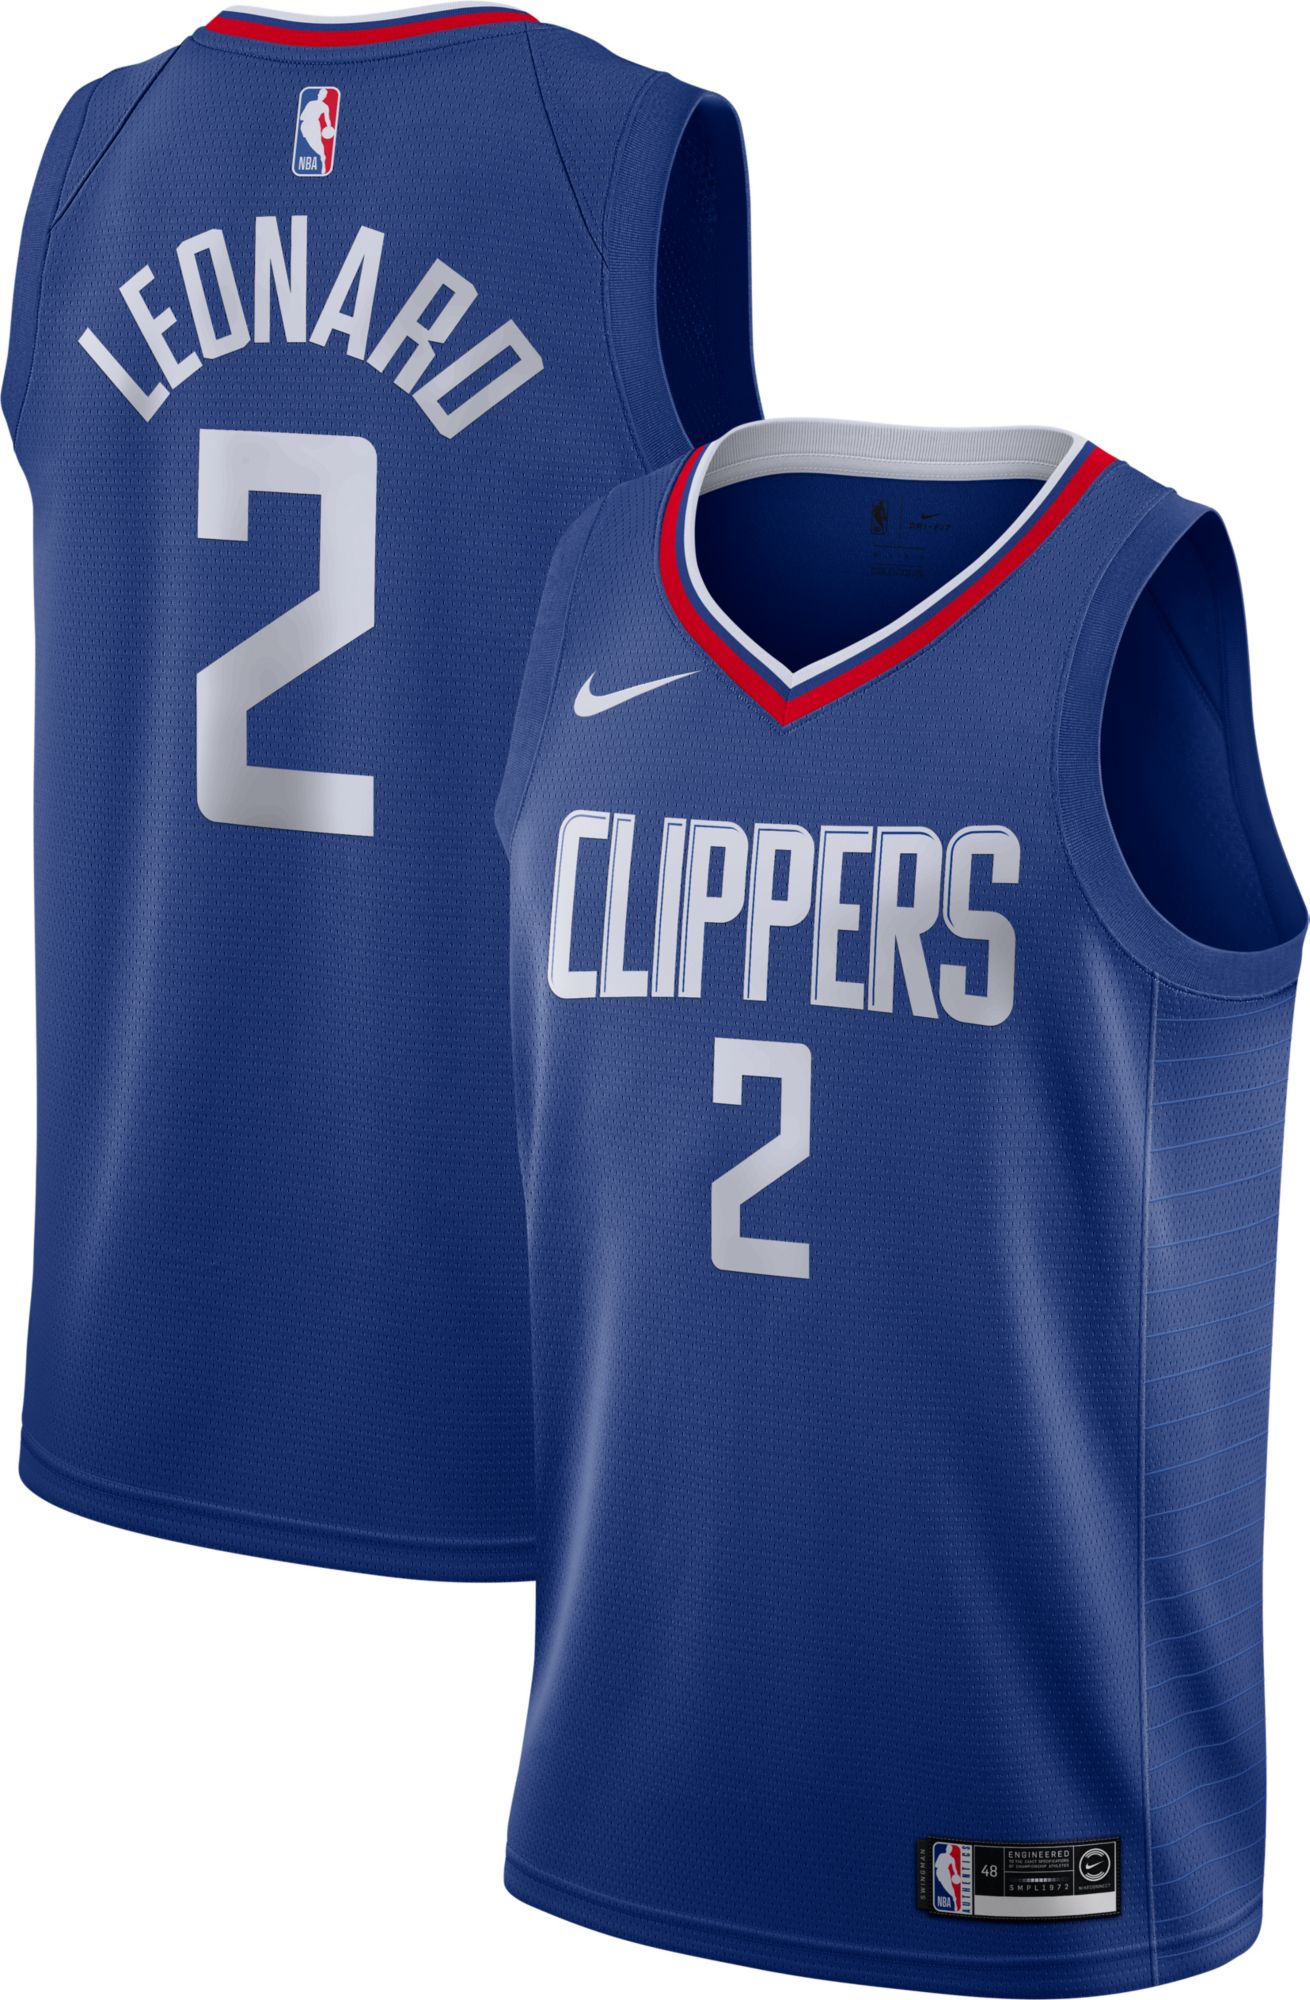 nba clippers jersey